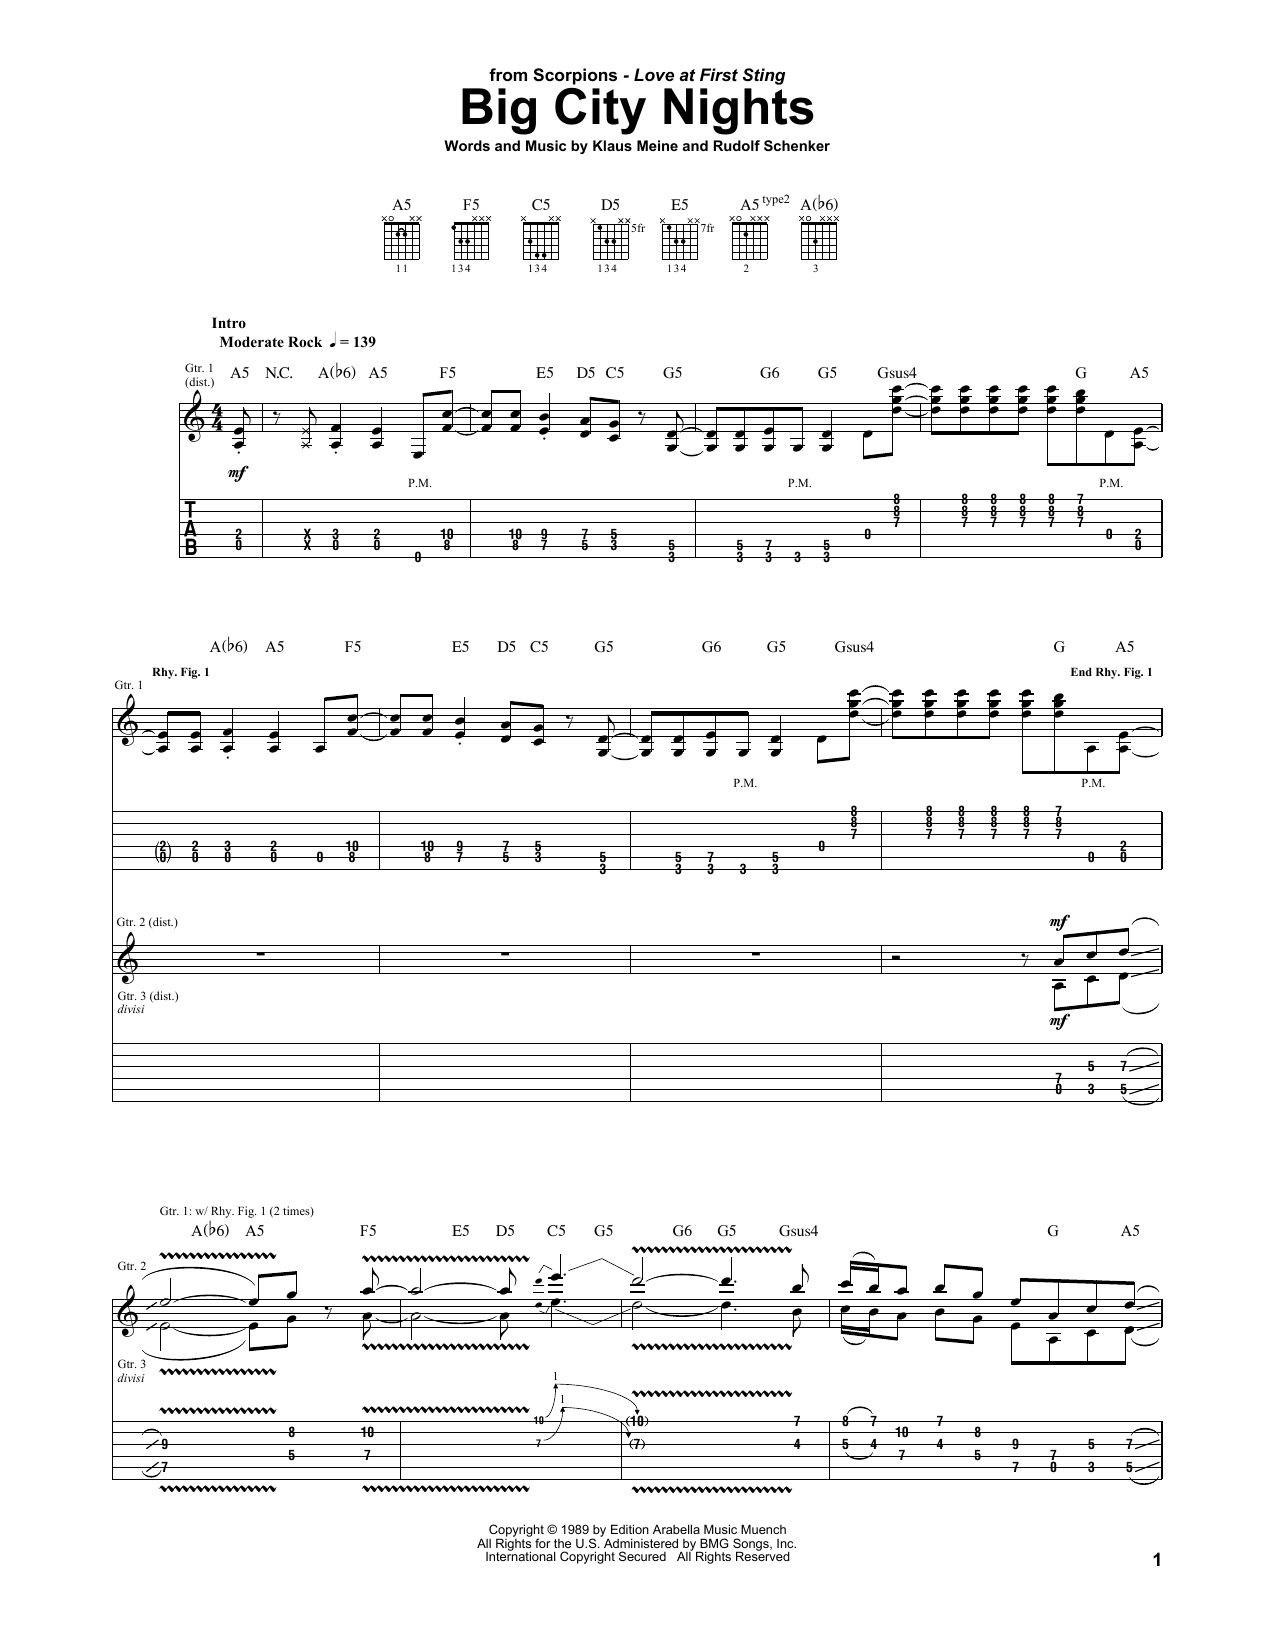 Scorpions Big City Nights sheet music notes and chords - Download Printable PDF and start playing in minutes.